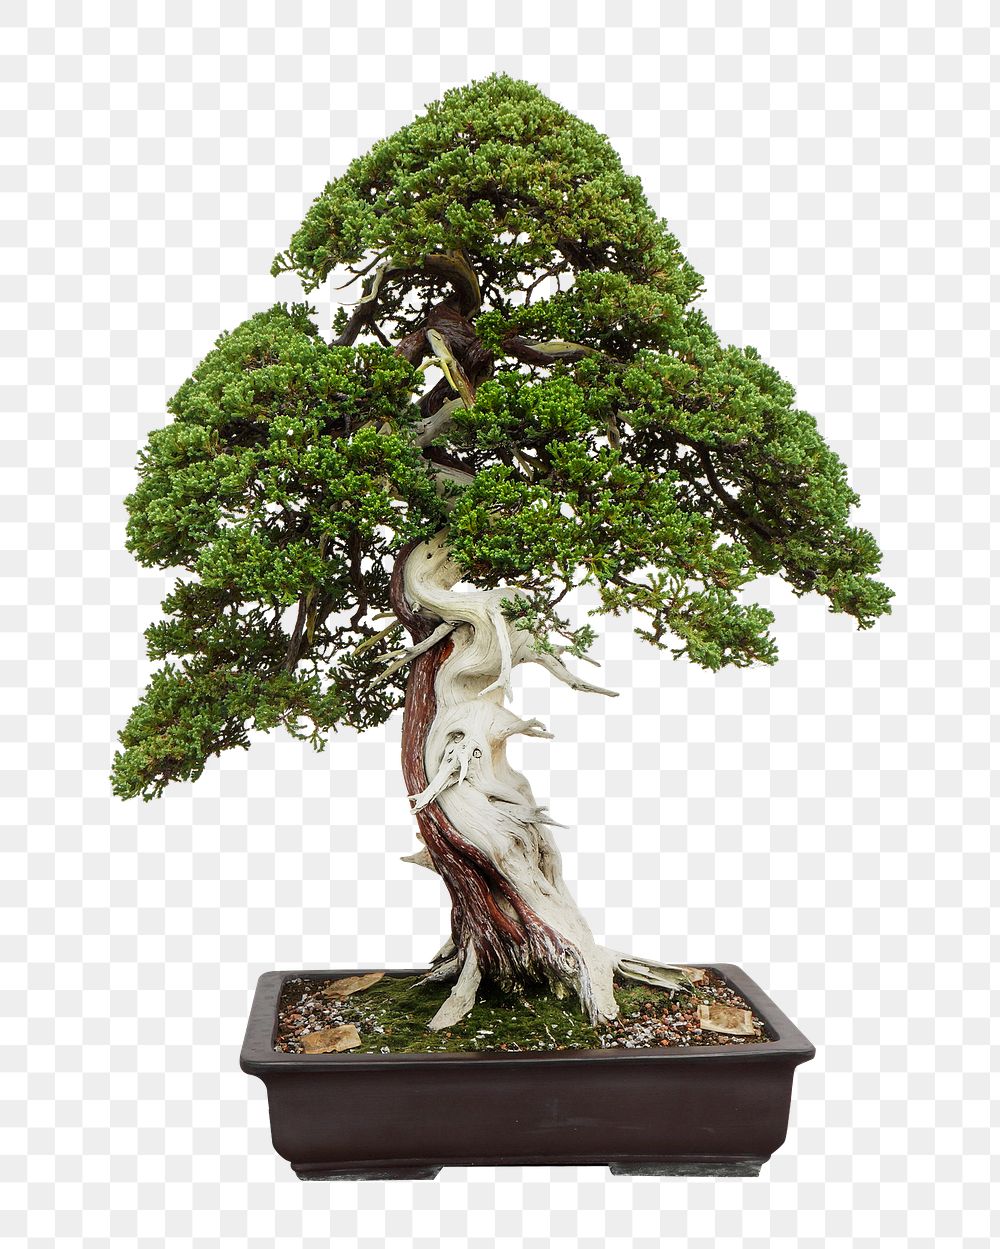 Bonsai tree in pot png collage element, transparent background